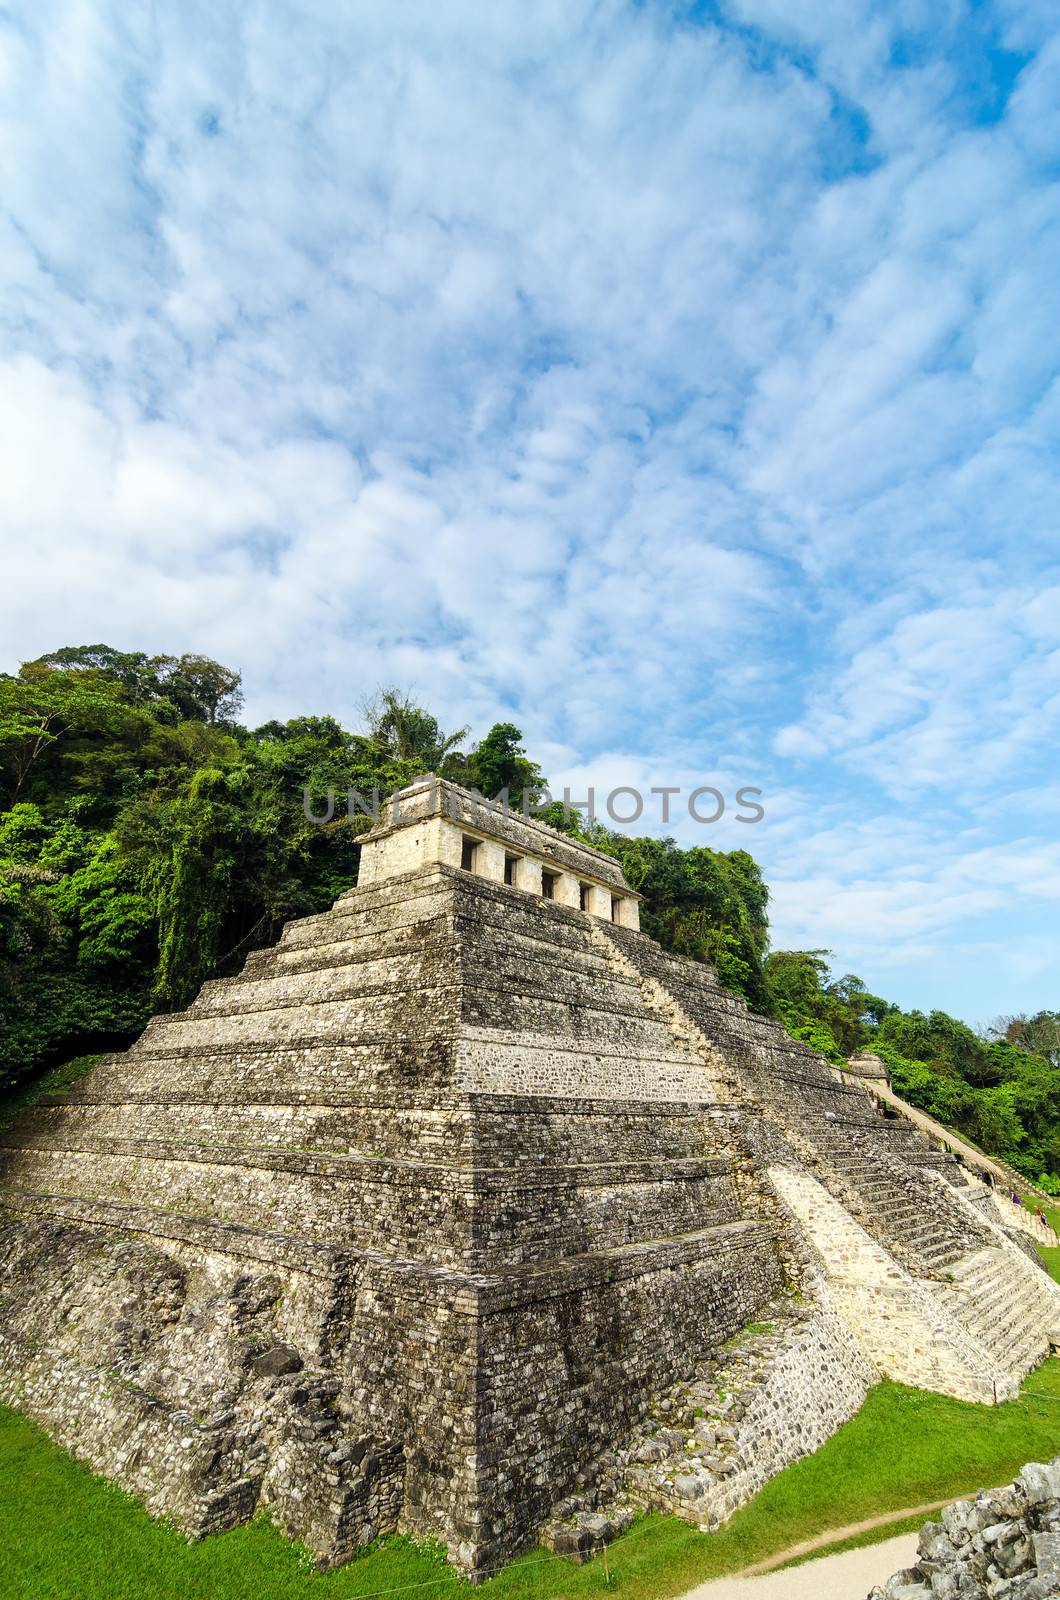 Vertical view of the Temple of Inscriptions at Palenque with a beautiful sky